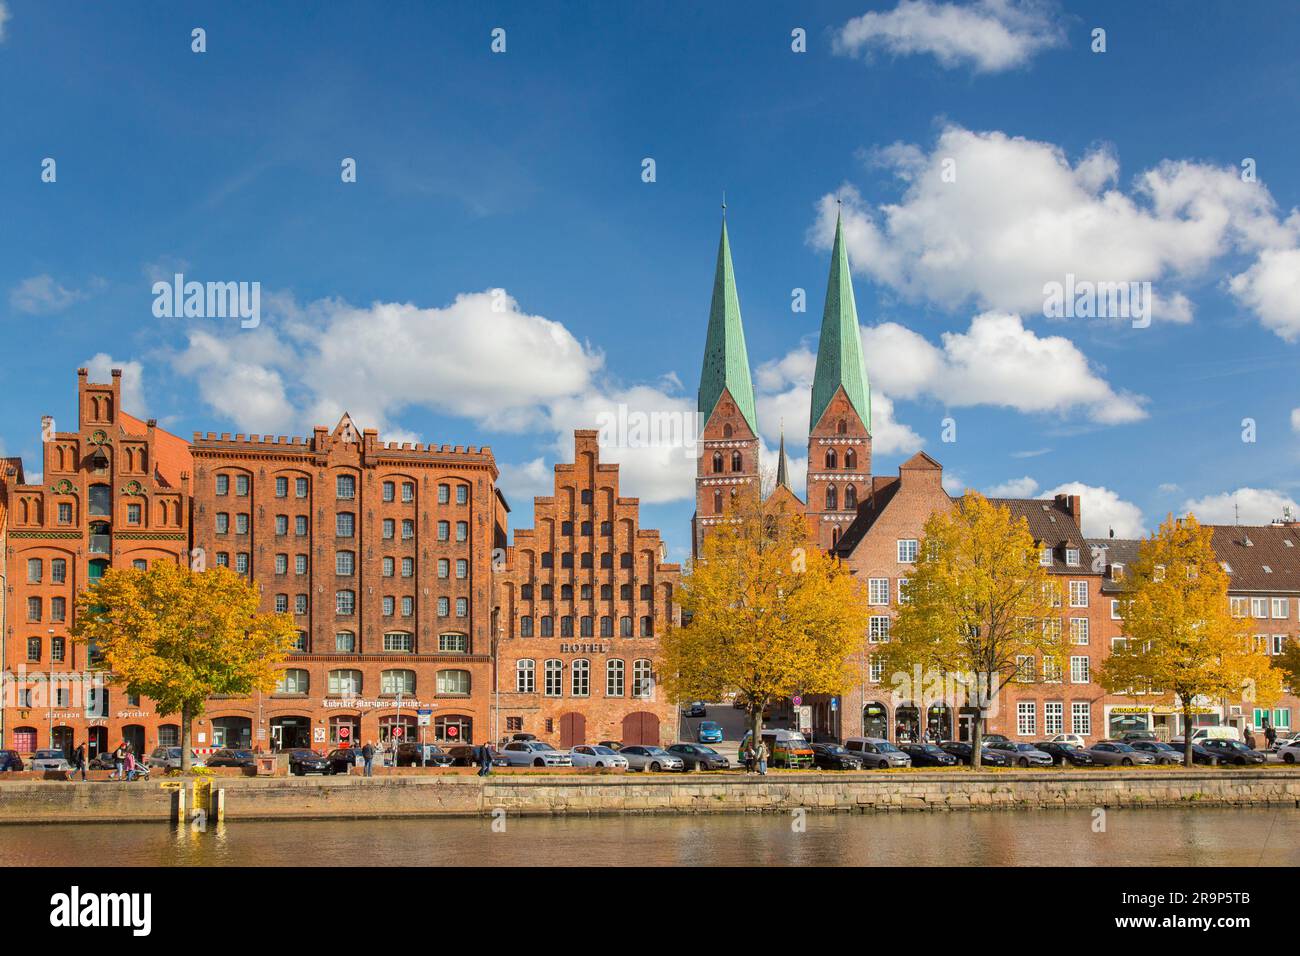 The church of St. Mary towering above historic houses on the edge of the river Trave in Luebeck (Lubeck), Schleswig-Holstein, Germany Stock Photo